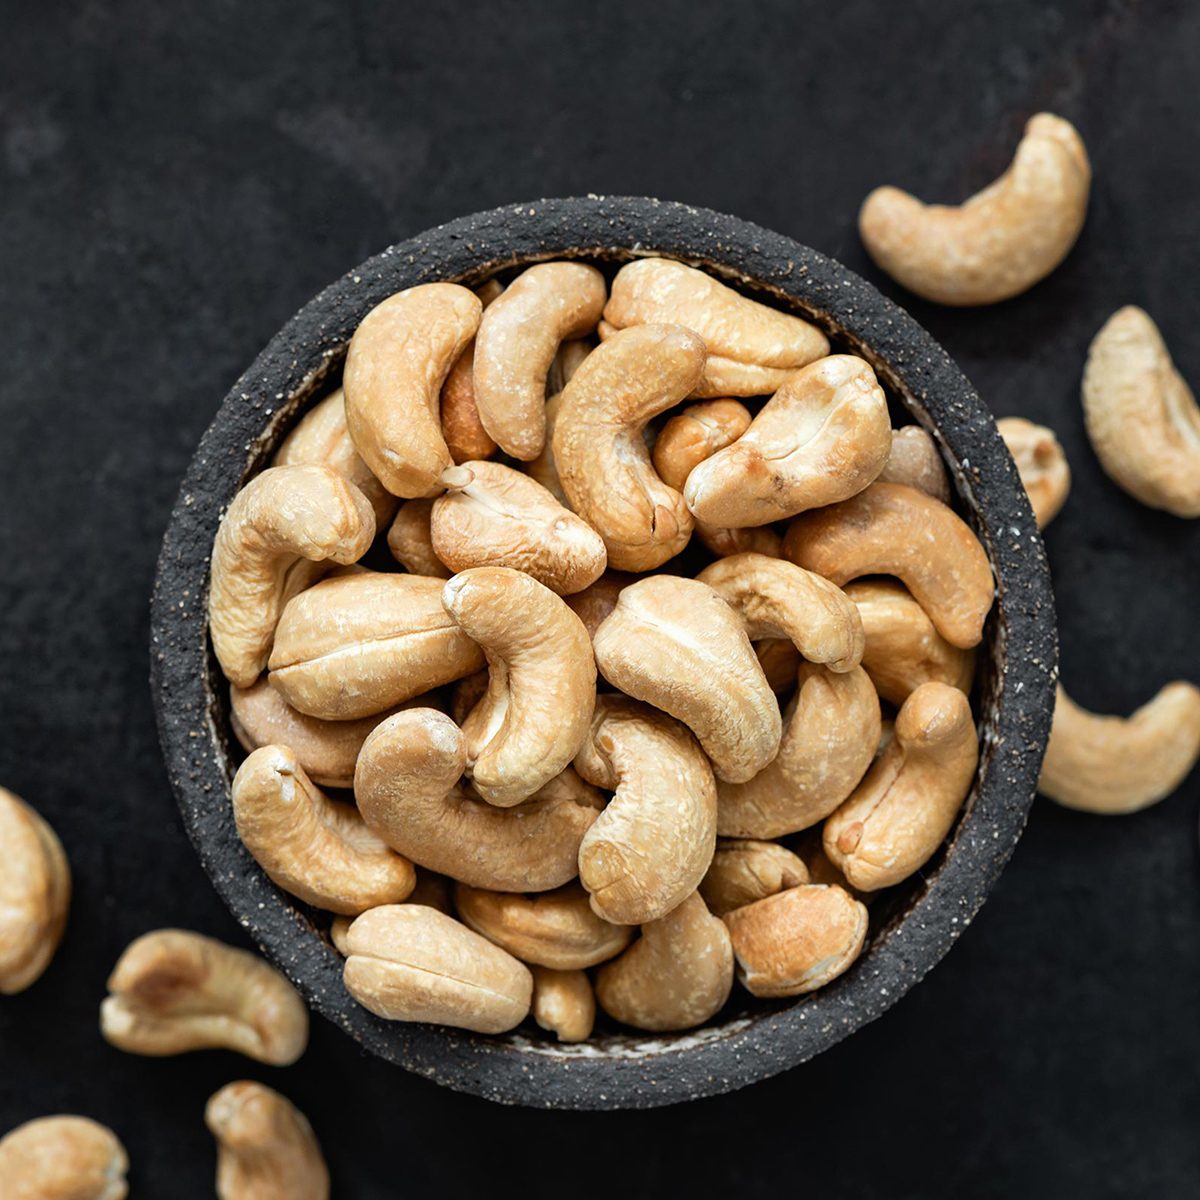 Cashew nuts in bowl on black background.